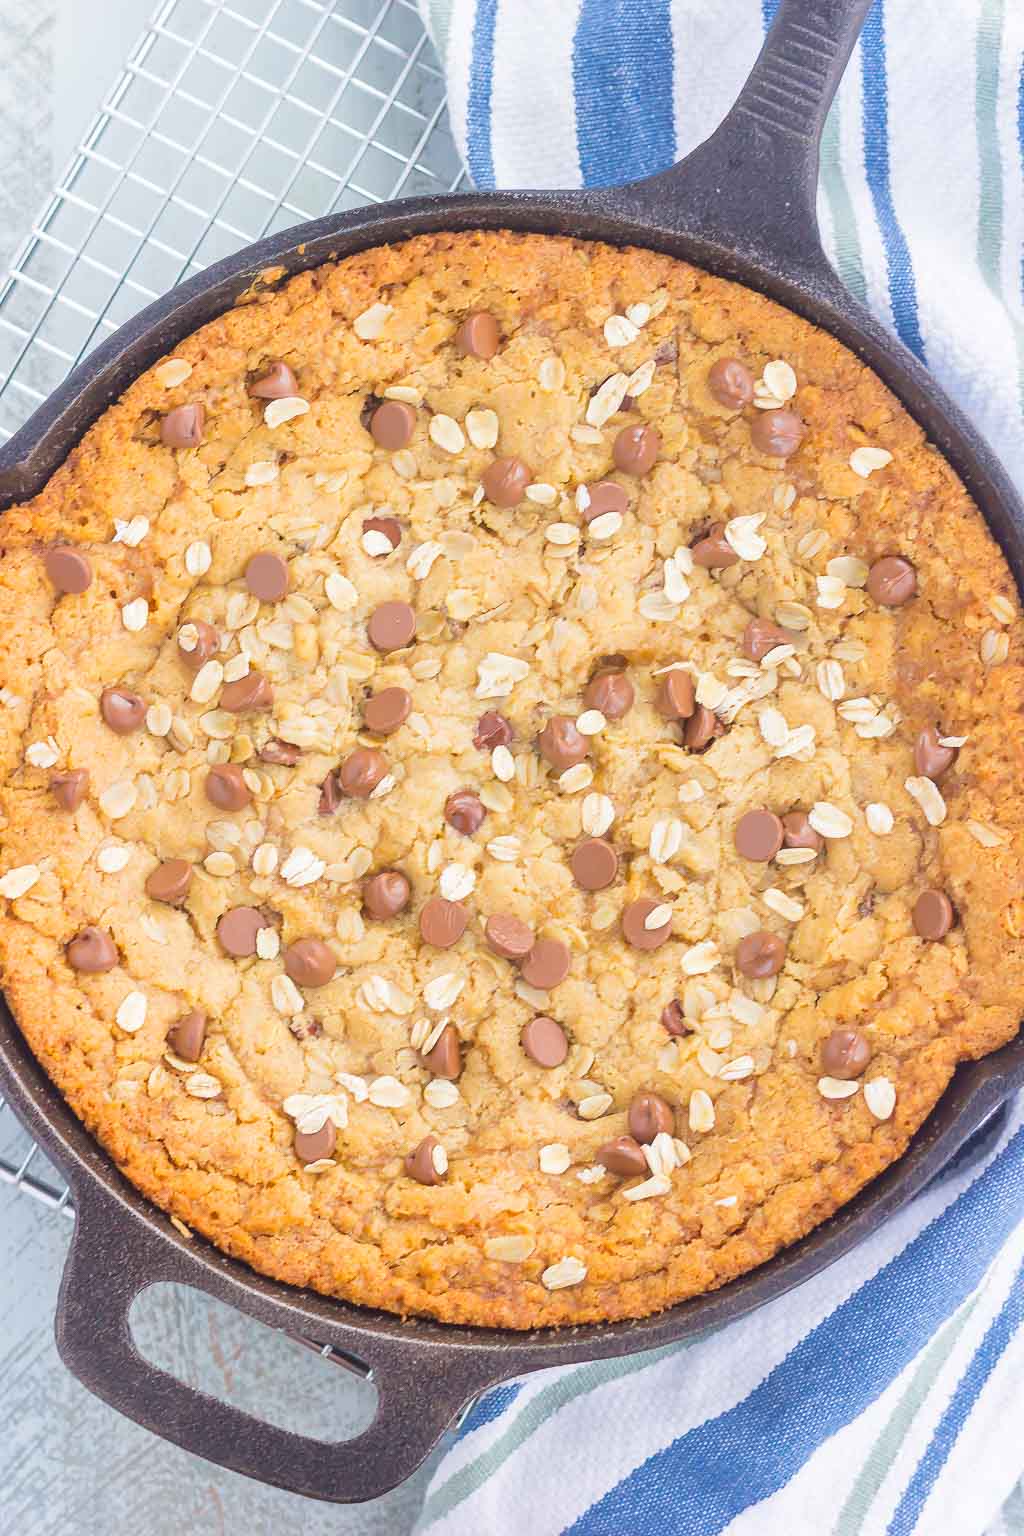 You won't be able to resist this warm, thick, and fudgy Peanut Butter Chocolate Chip Skillet Cookie. Packed with creamy peanut butter, hearty oats, and chocolate chips, this cookie is packed with flavor and is perfect when served with a big scoop of vanilla ice cream!